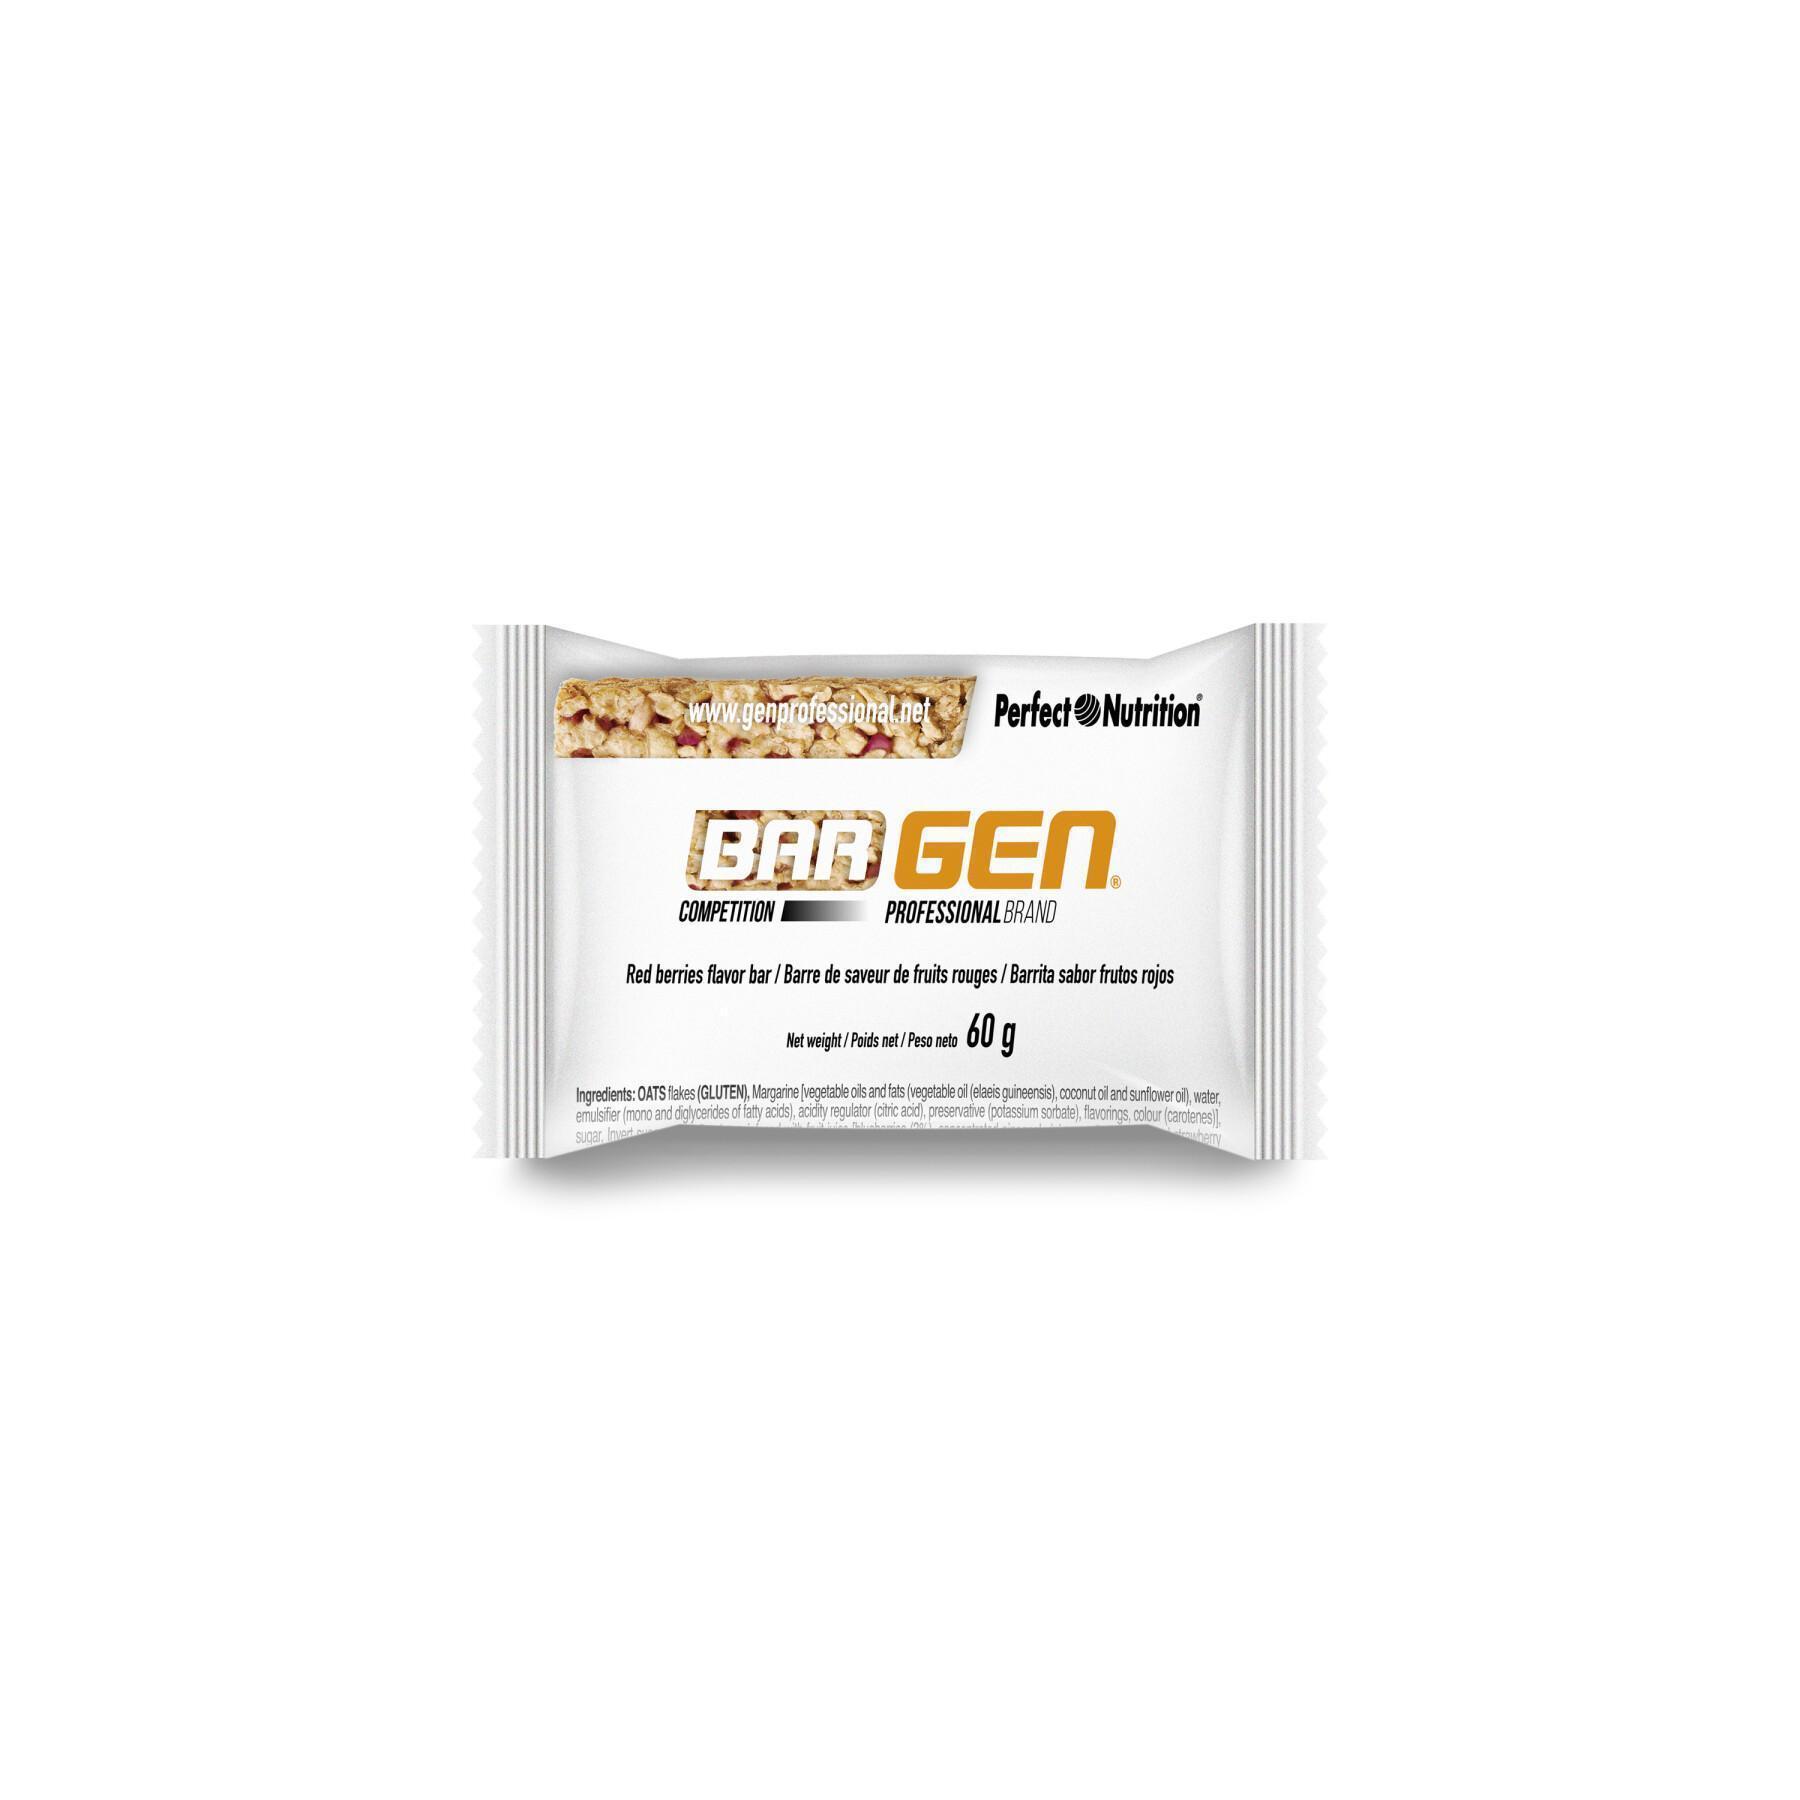 Box of 40 nutrition bars Gen Professional Bargen Competition Red